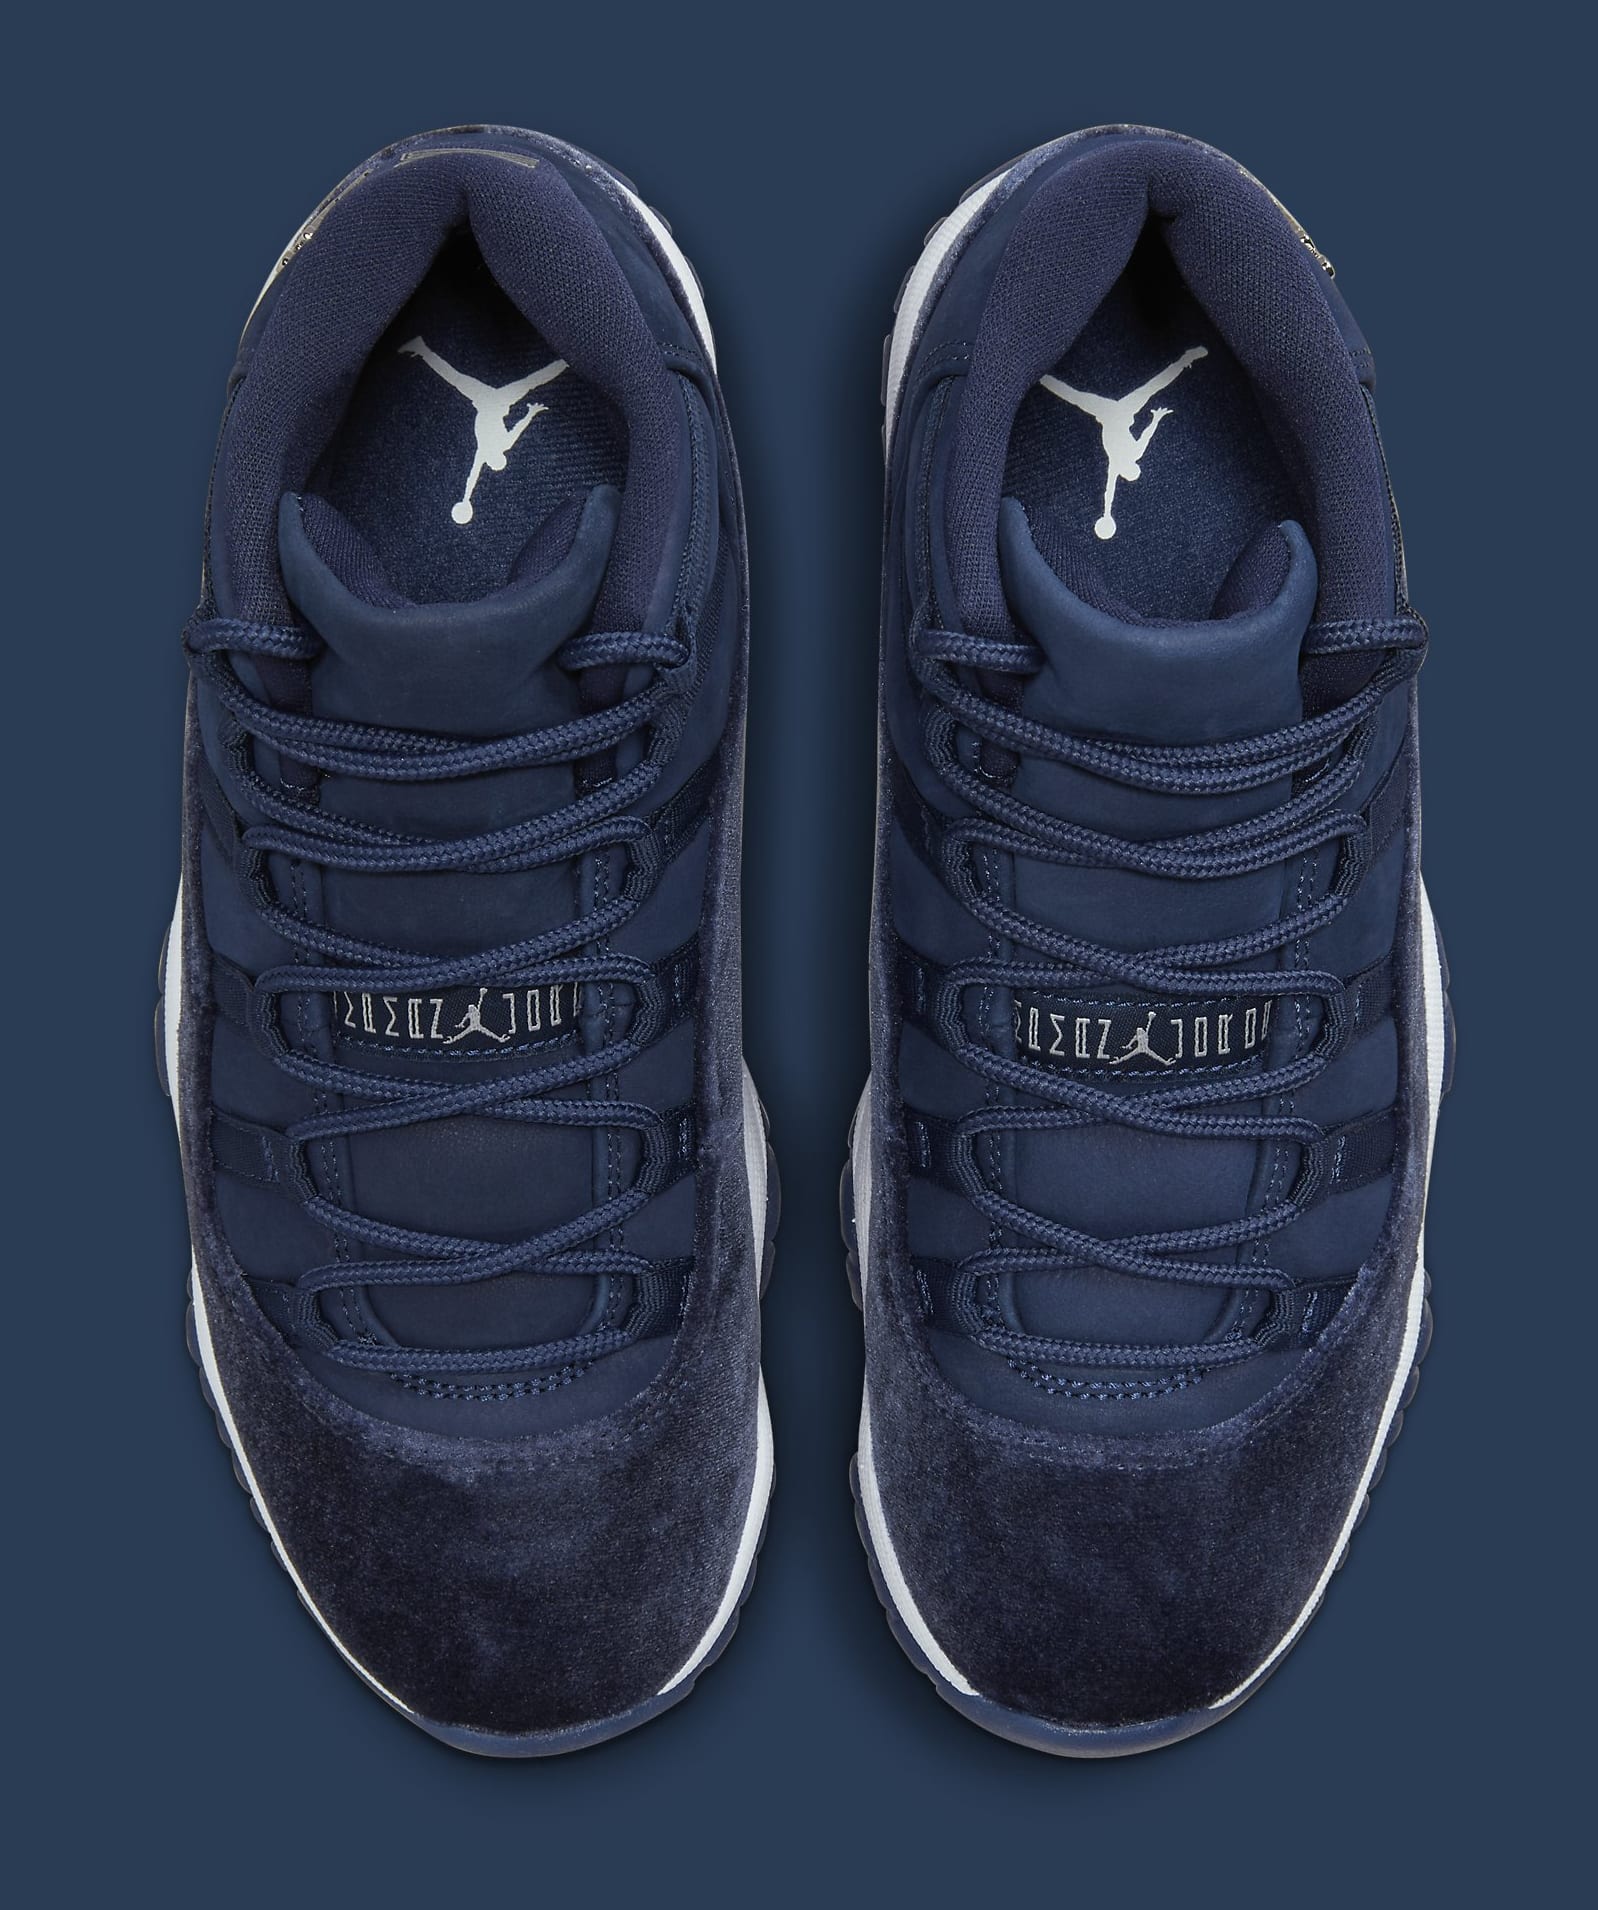 Jumpman 11 Classic Basketball Shoes Cherry 11s Midnight Navy Cool